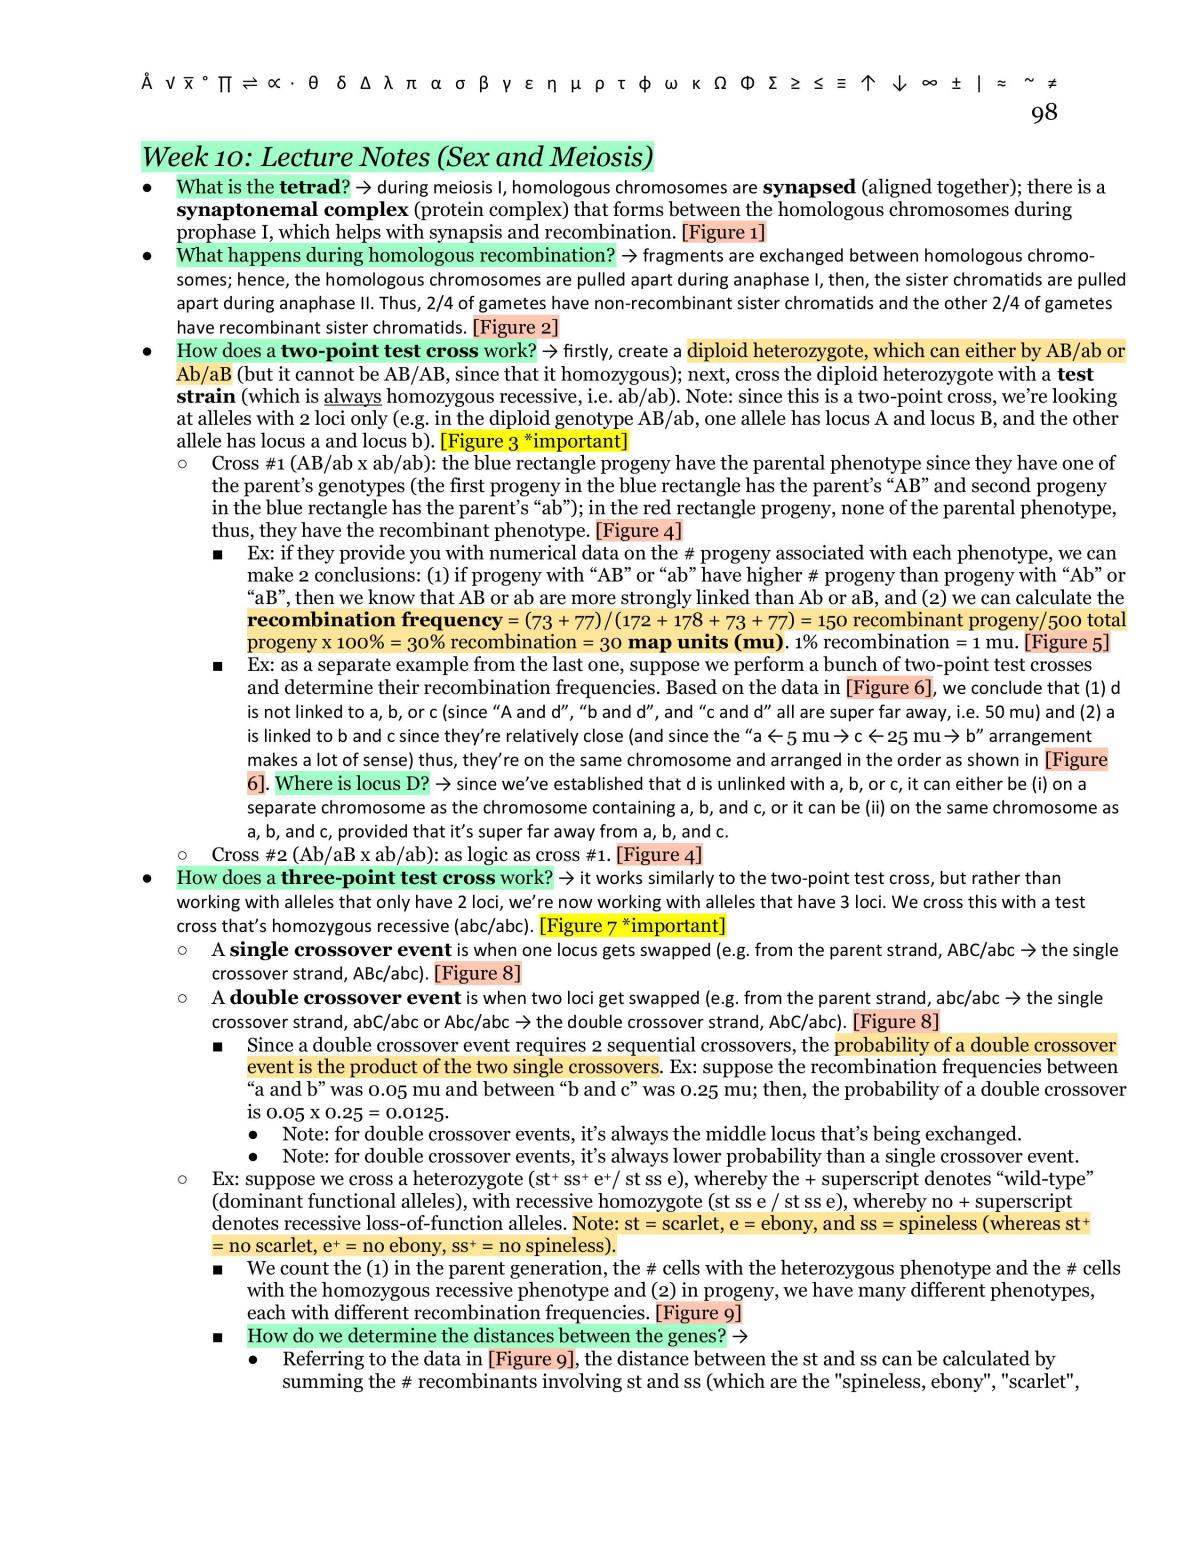 Genetics 2581 Course Notes - Page 98